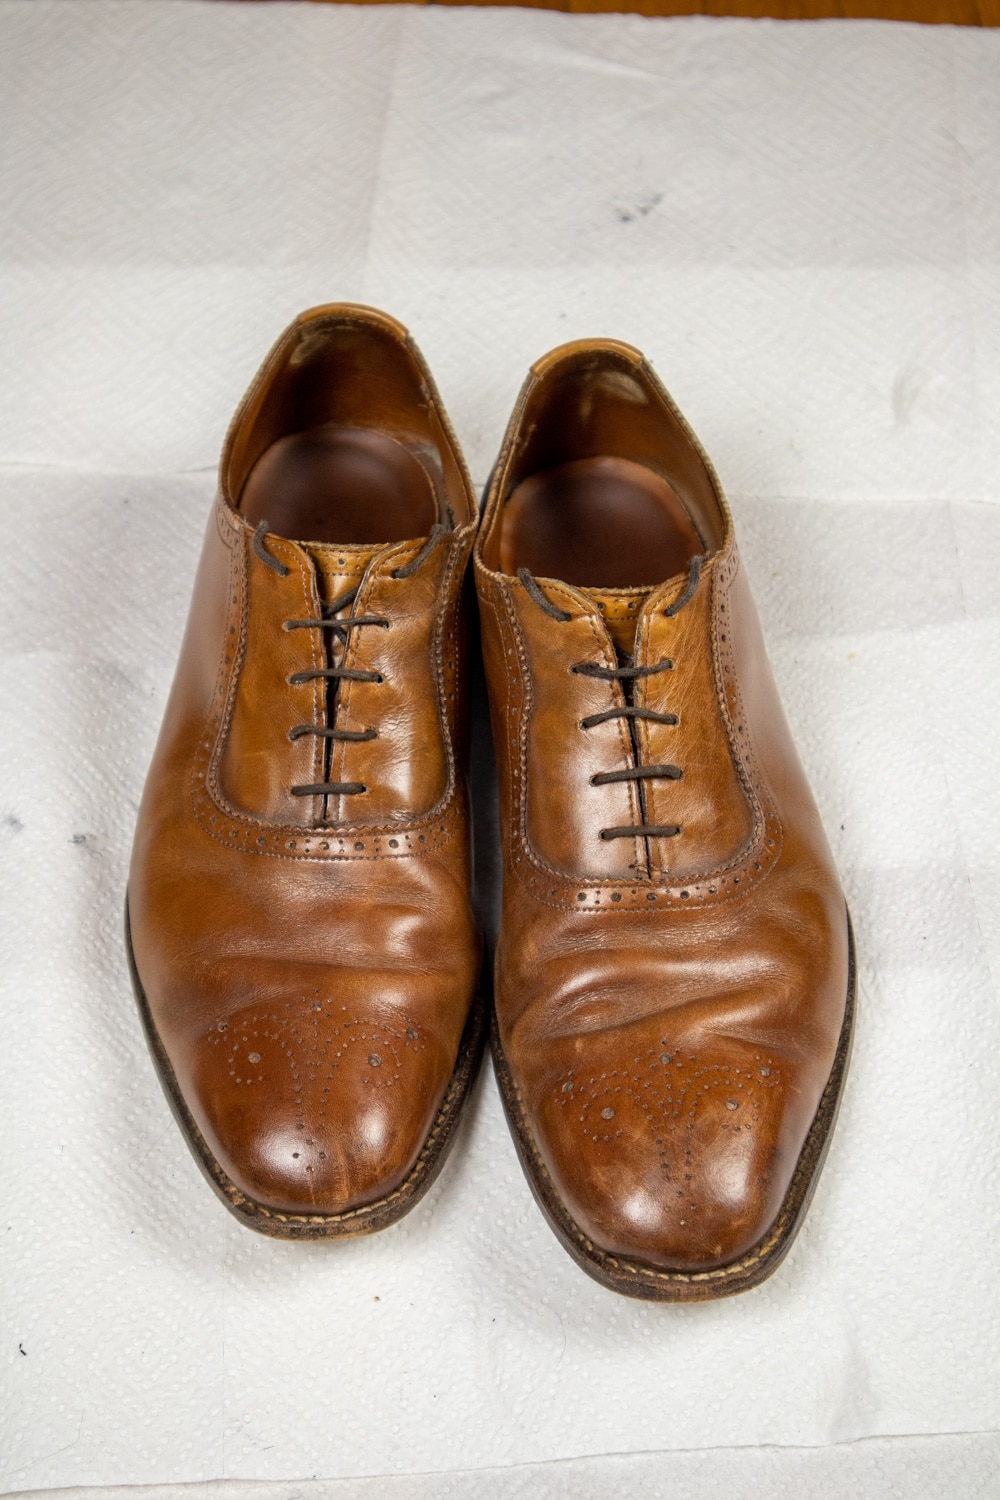 Shoe Polishing: Learn The Steps To Shine Your Shoes - The Elegant